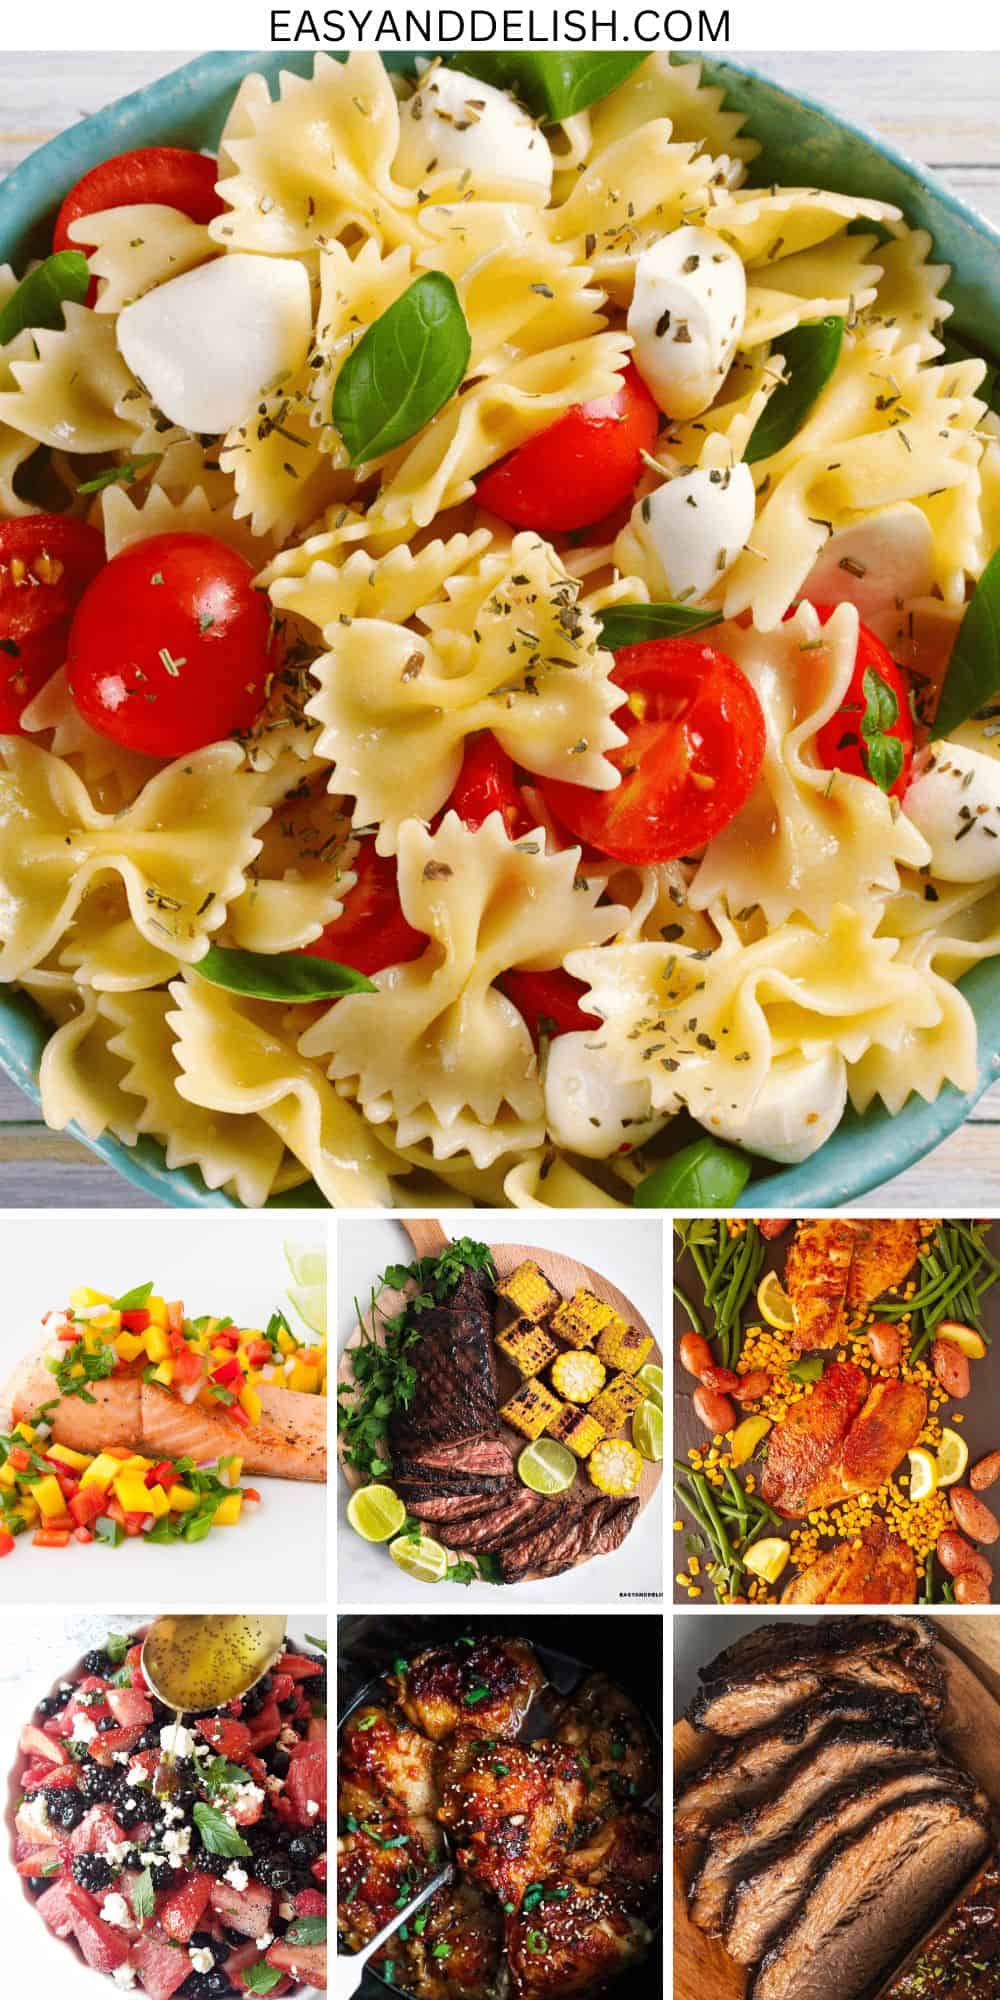 Seven weeknight meals for hot days that include an Italian pasta salad, grilled fish and steak, tilapia, berry salad, crockpot BBQ chicken, and beef brisket.